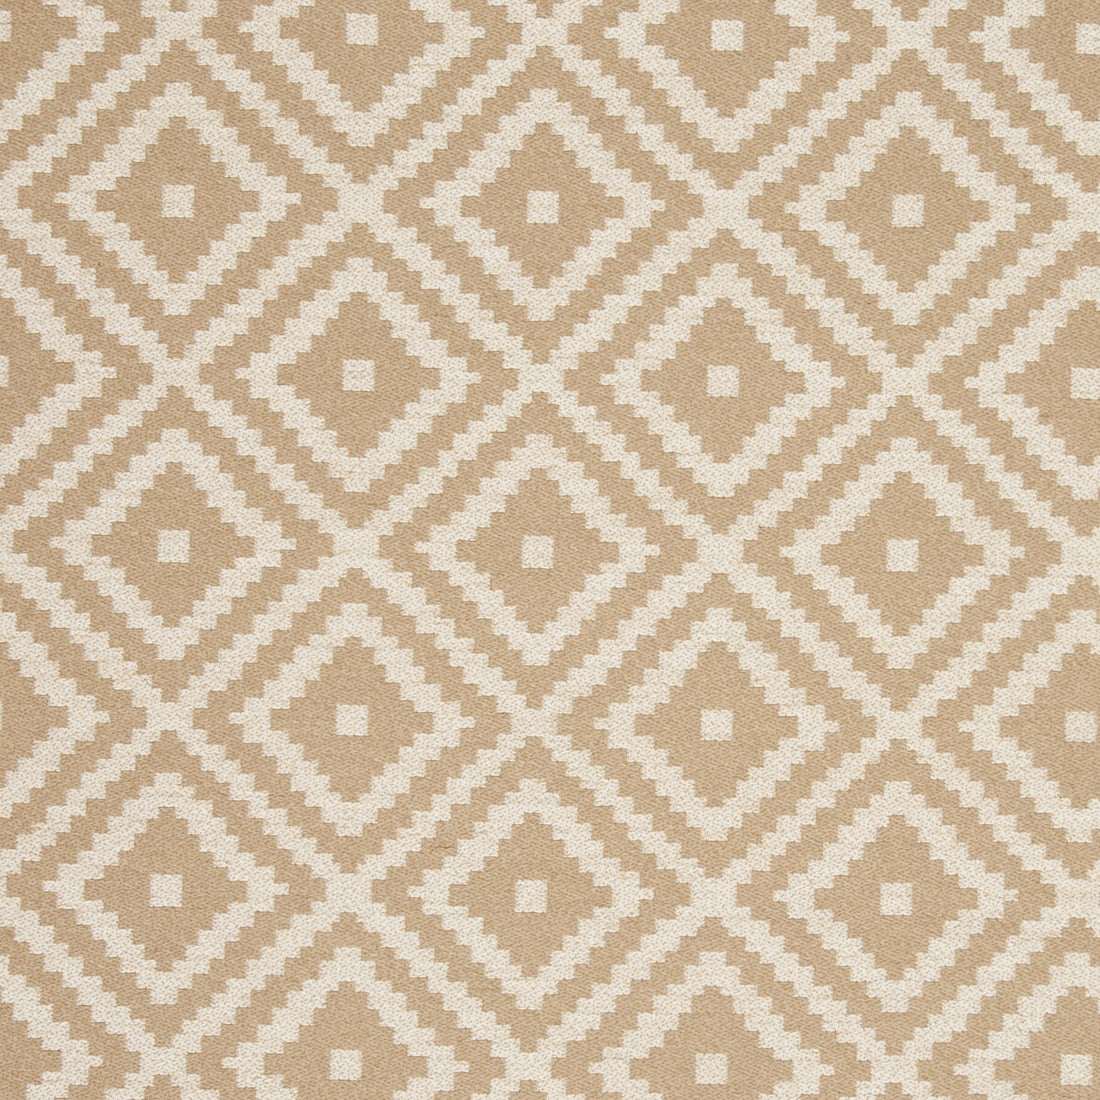 Tahoma fabric in sand color - pattern F0810/13.CAC.0 - by Clarke And Clarke in the Clarke &amp; Clarke Navajo collection